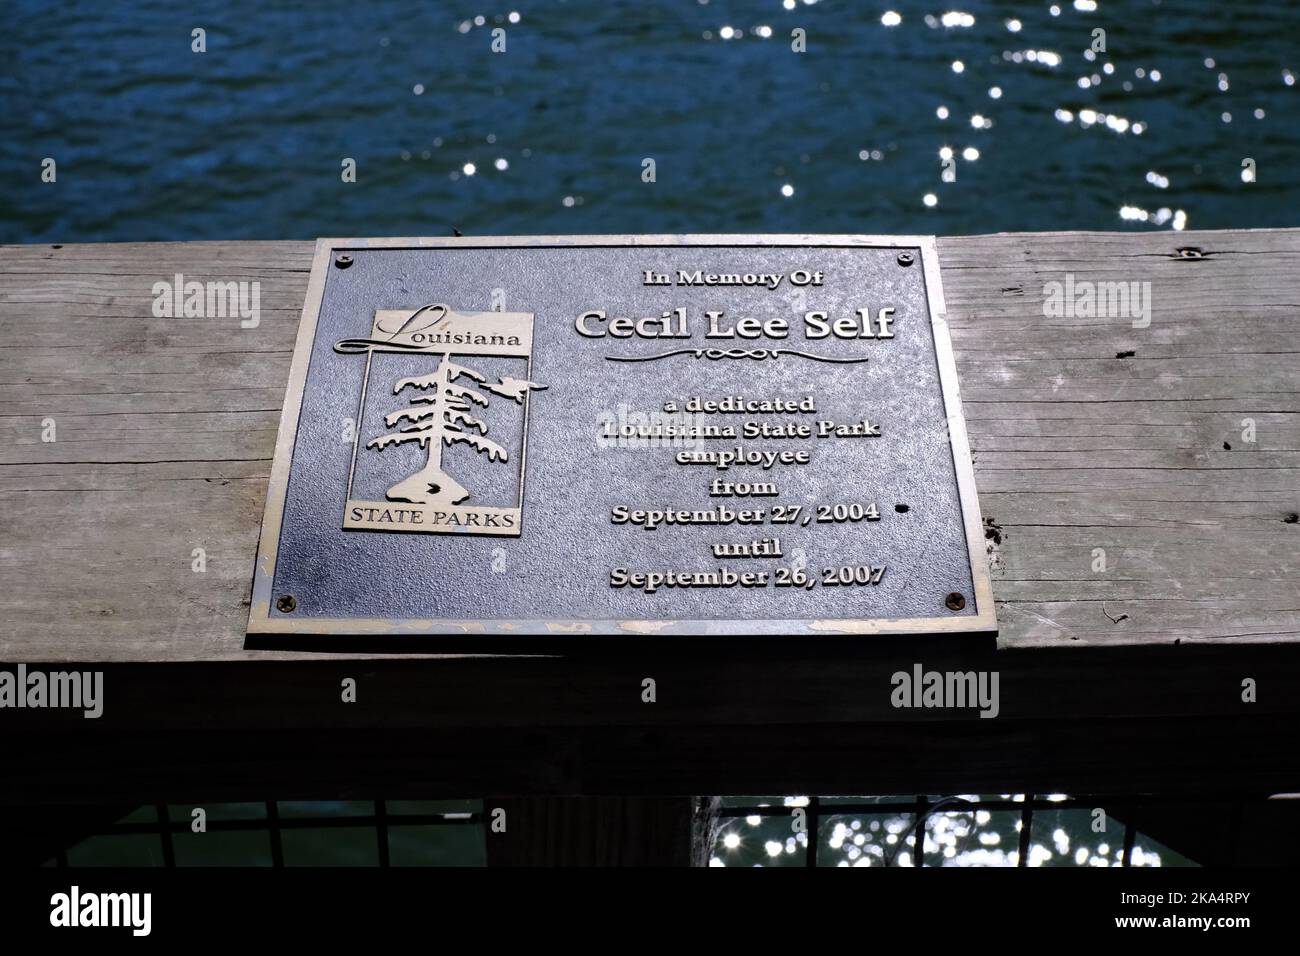 This is a South Toledo Bend State Park Plaque for Cecil Lee Self, an employee of the park from 2004 to 2007. Stock Photo